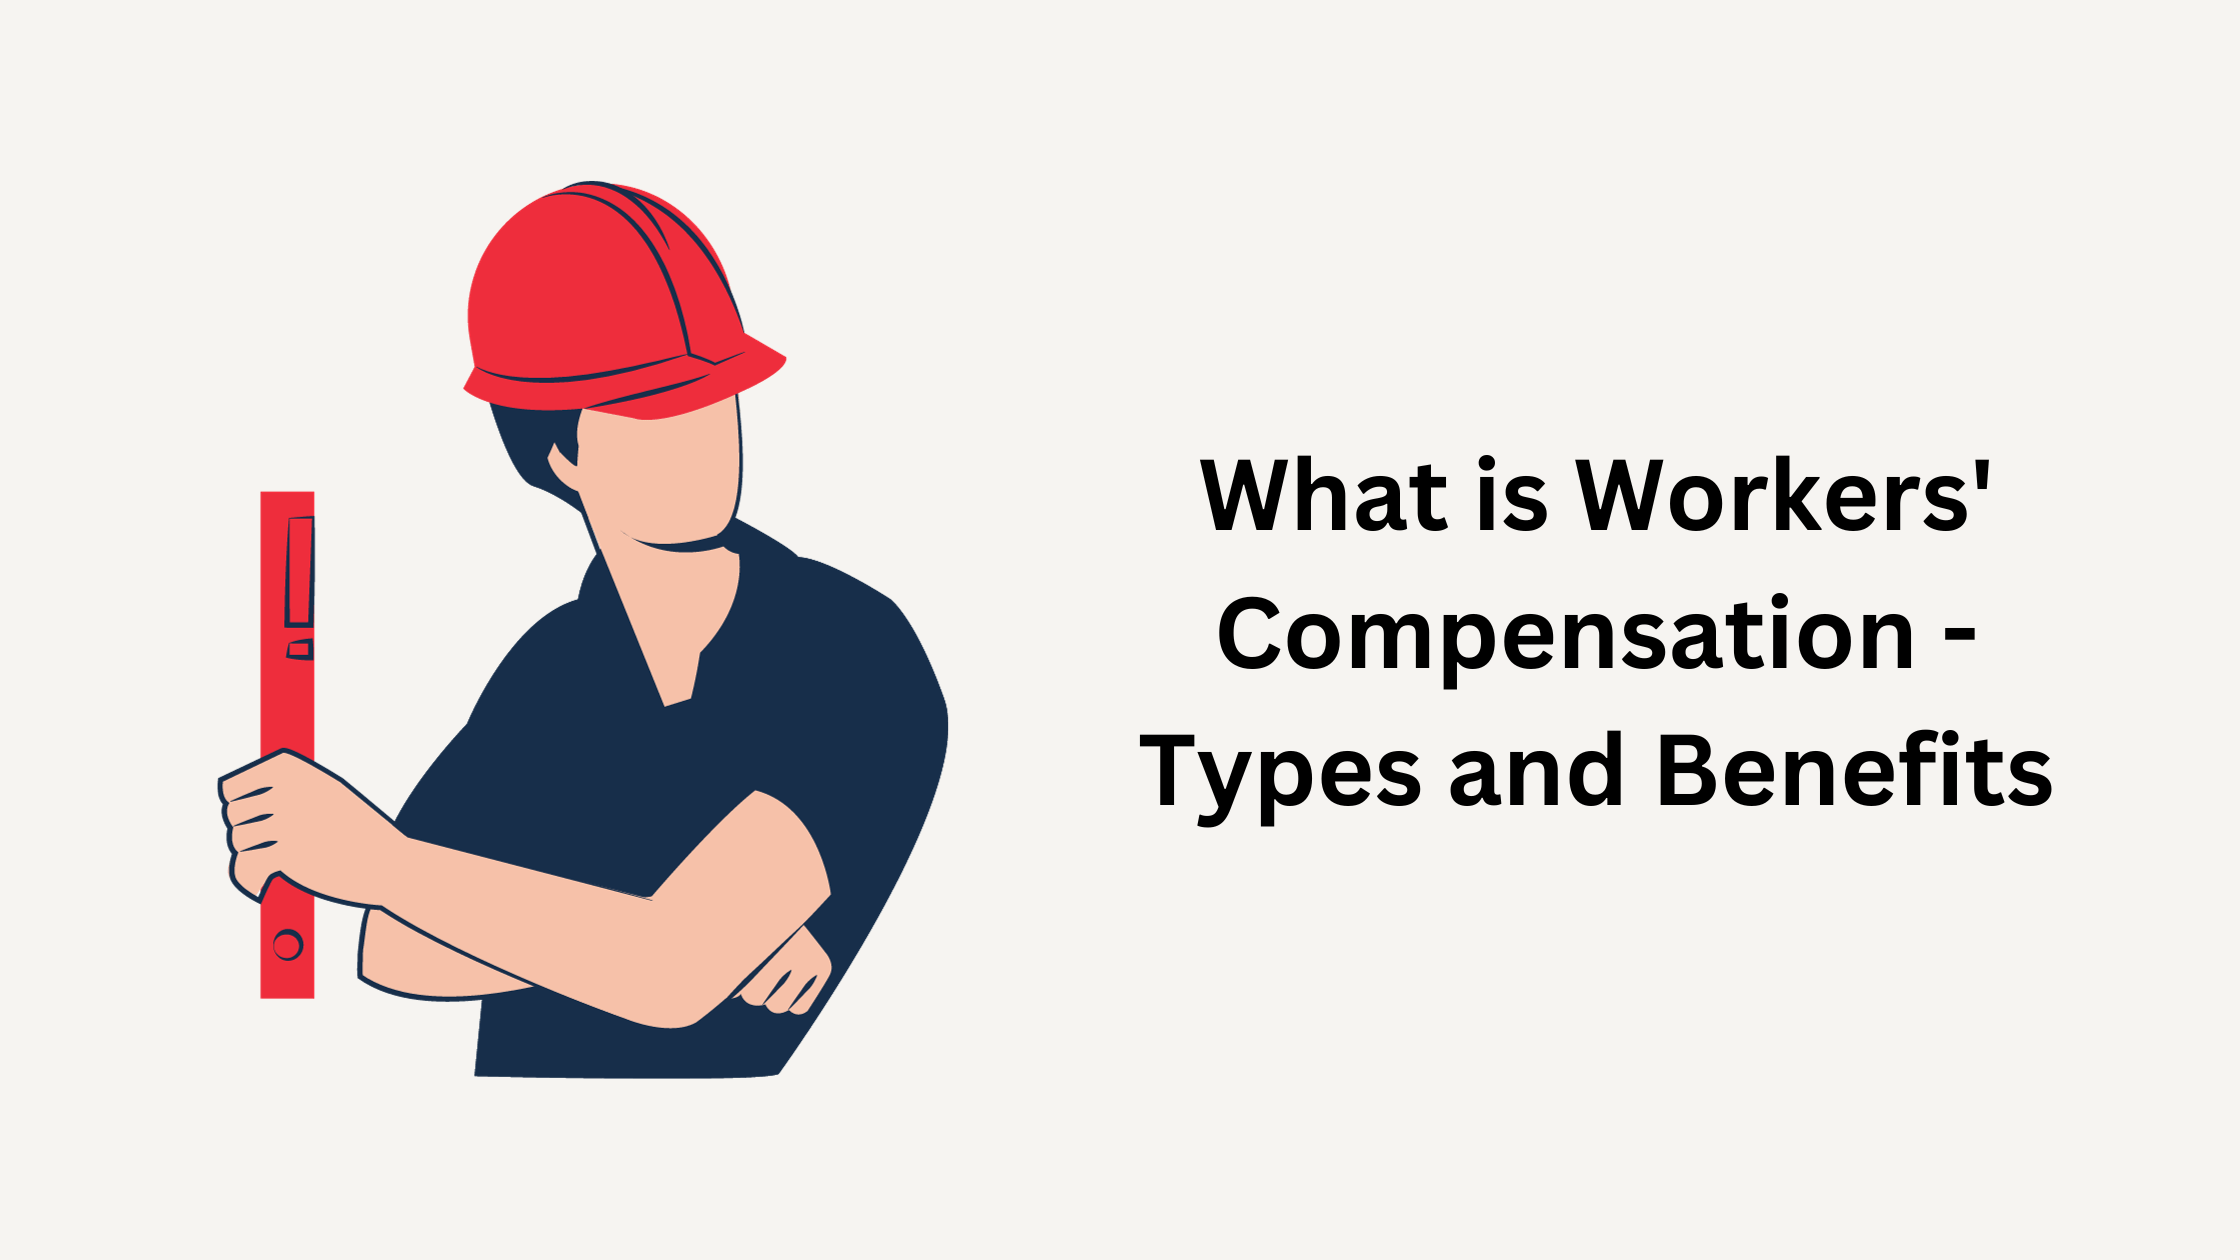 What is Workers' Compensation - Types and Benefits